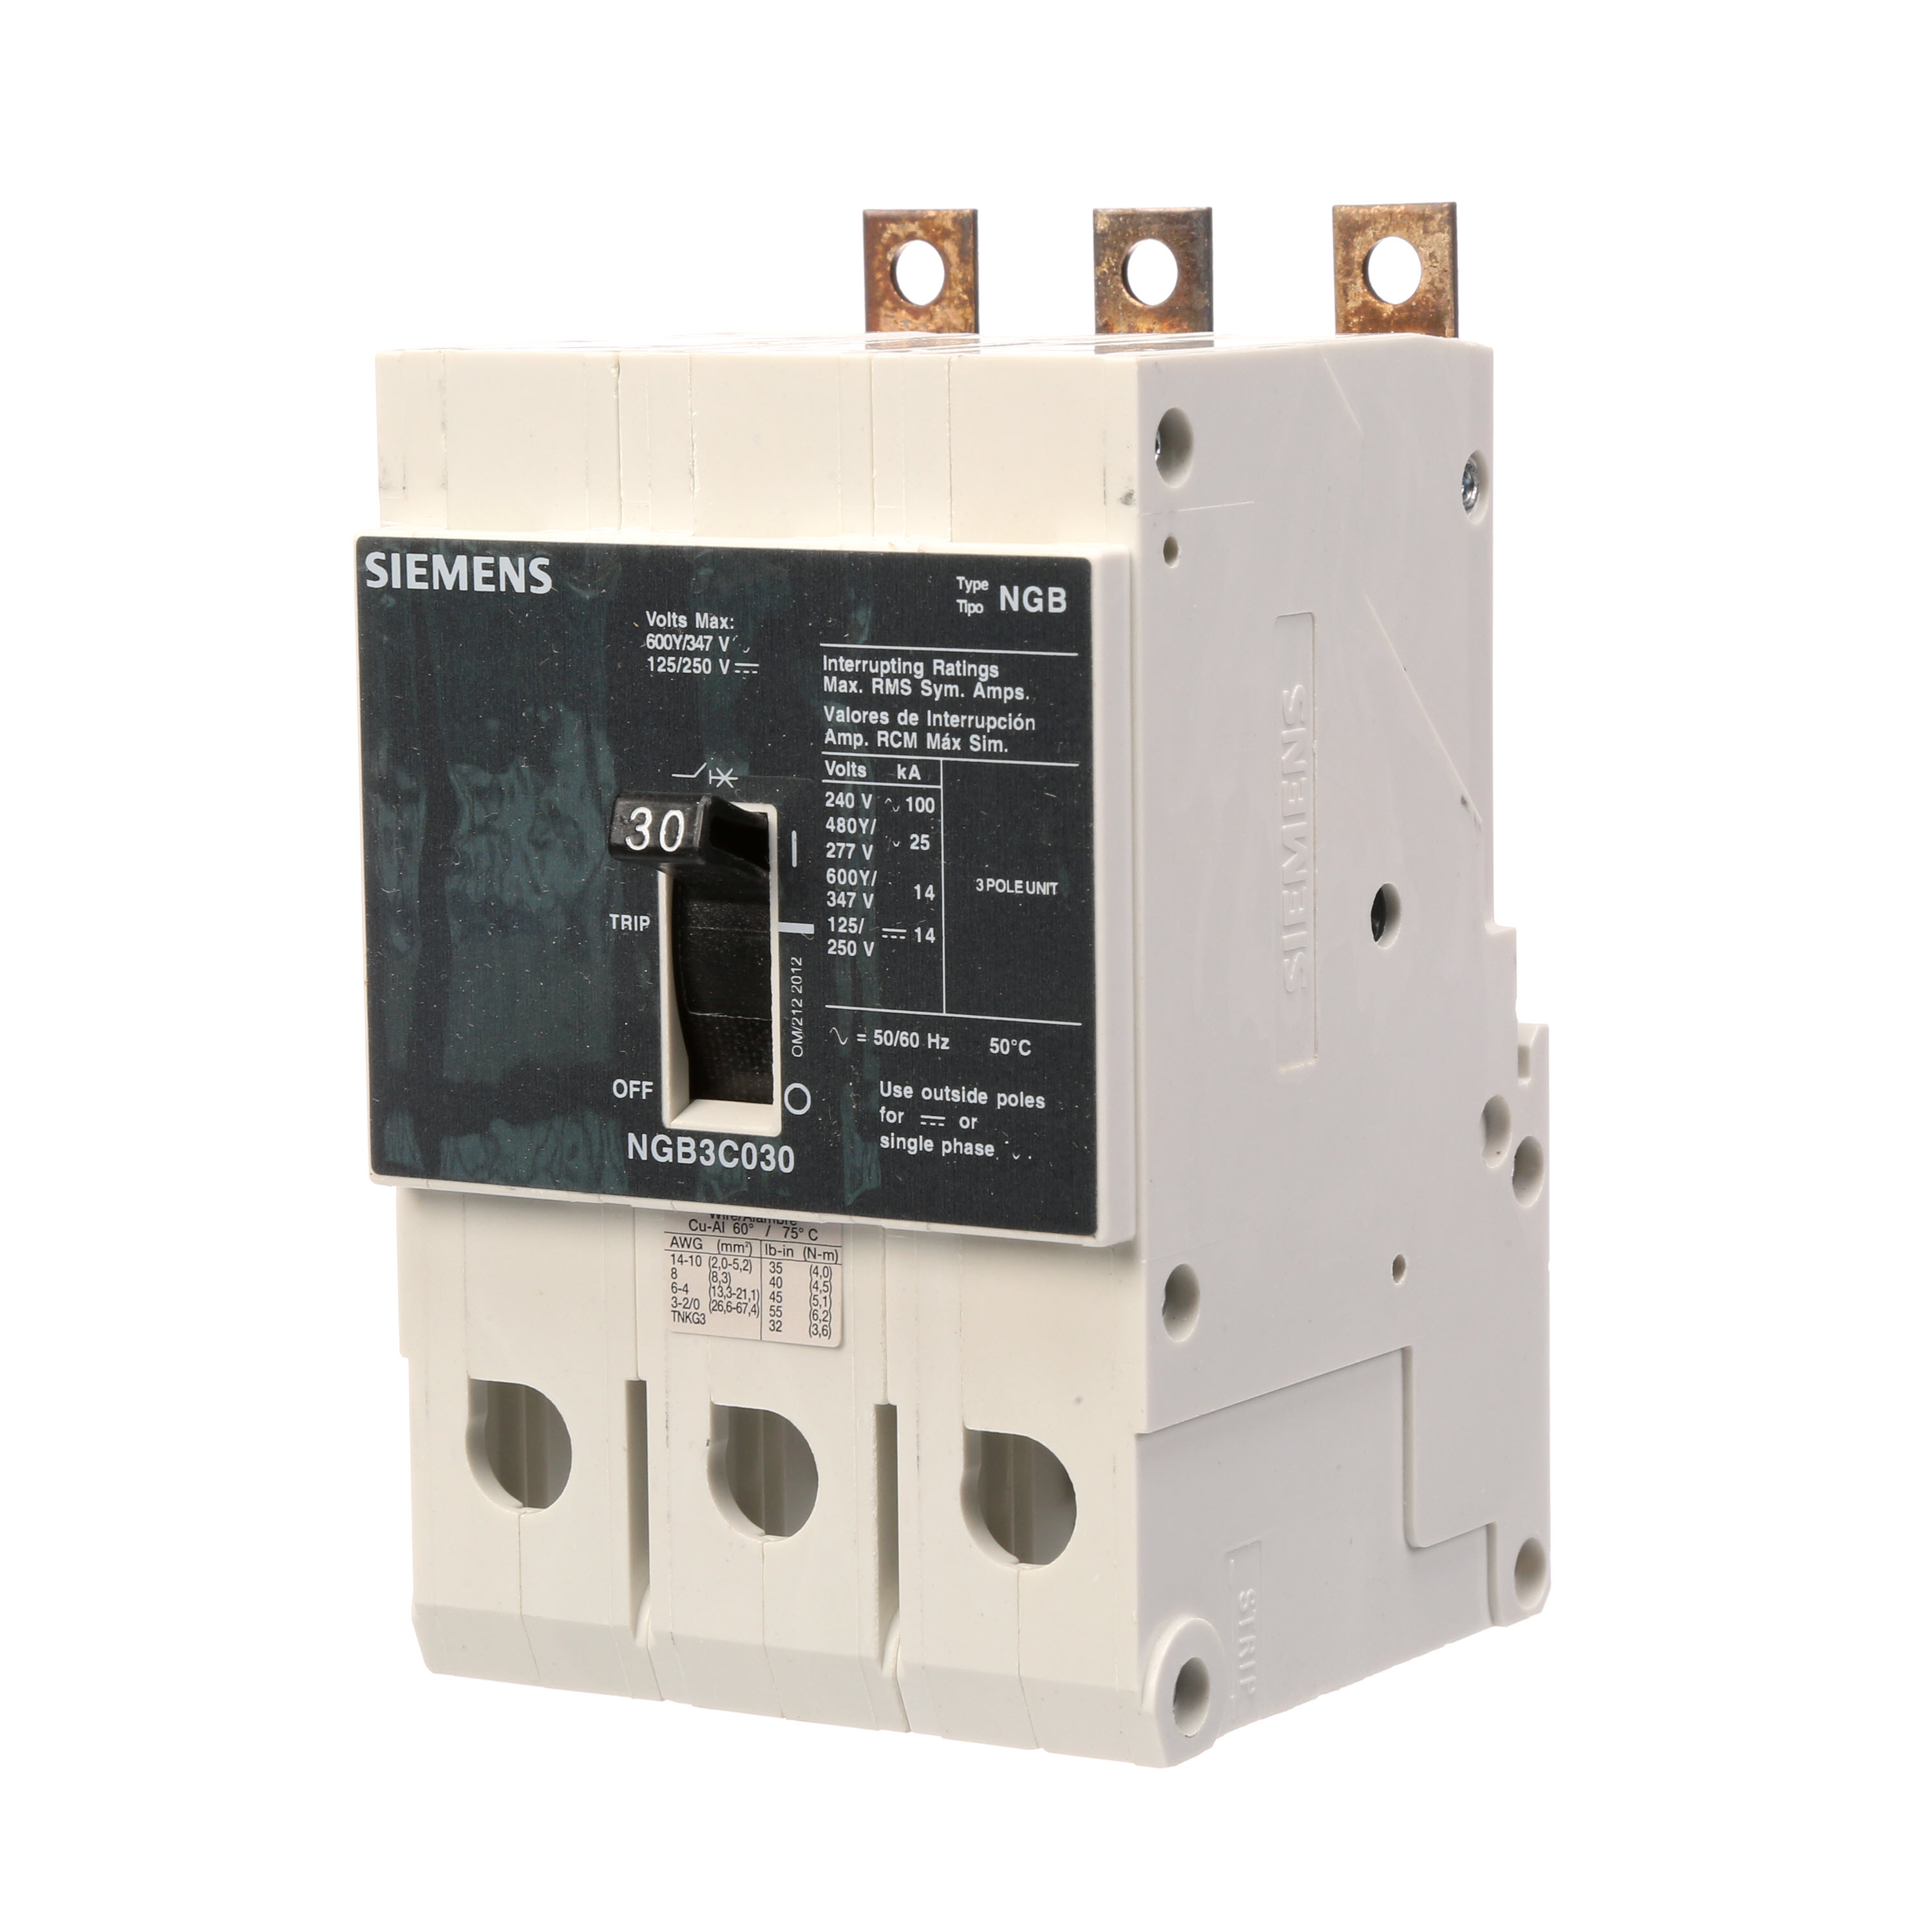 SIEMENS LOW VOLTAGE PANELBOARD MOUNT G FRAME CIRCUIT BREAKER WITH THERMAL - MAGNETIC TRIP. NON UL NGB FRAME WITH STANDARD BREAKING C APACITY. 30A 3-POLE (14KAIC AT 600Y/347V) (25KAIC AT 480Y/277V). SPECIAL FEATURES MOUNTS ON PANELBOARD, 50DEG CALIBRATION, LOAD SIDE LUGS ONLY (TC1Q1) WIRE RANGE 14 - 10 AWS (CU/AL). DIMENSIONS (W x H x D) IN 3 x 5.4 x 2.8.